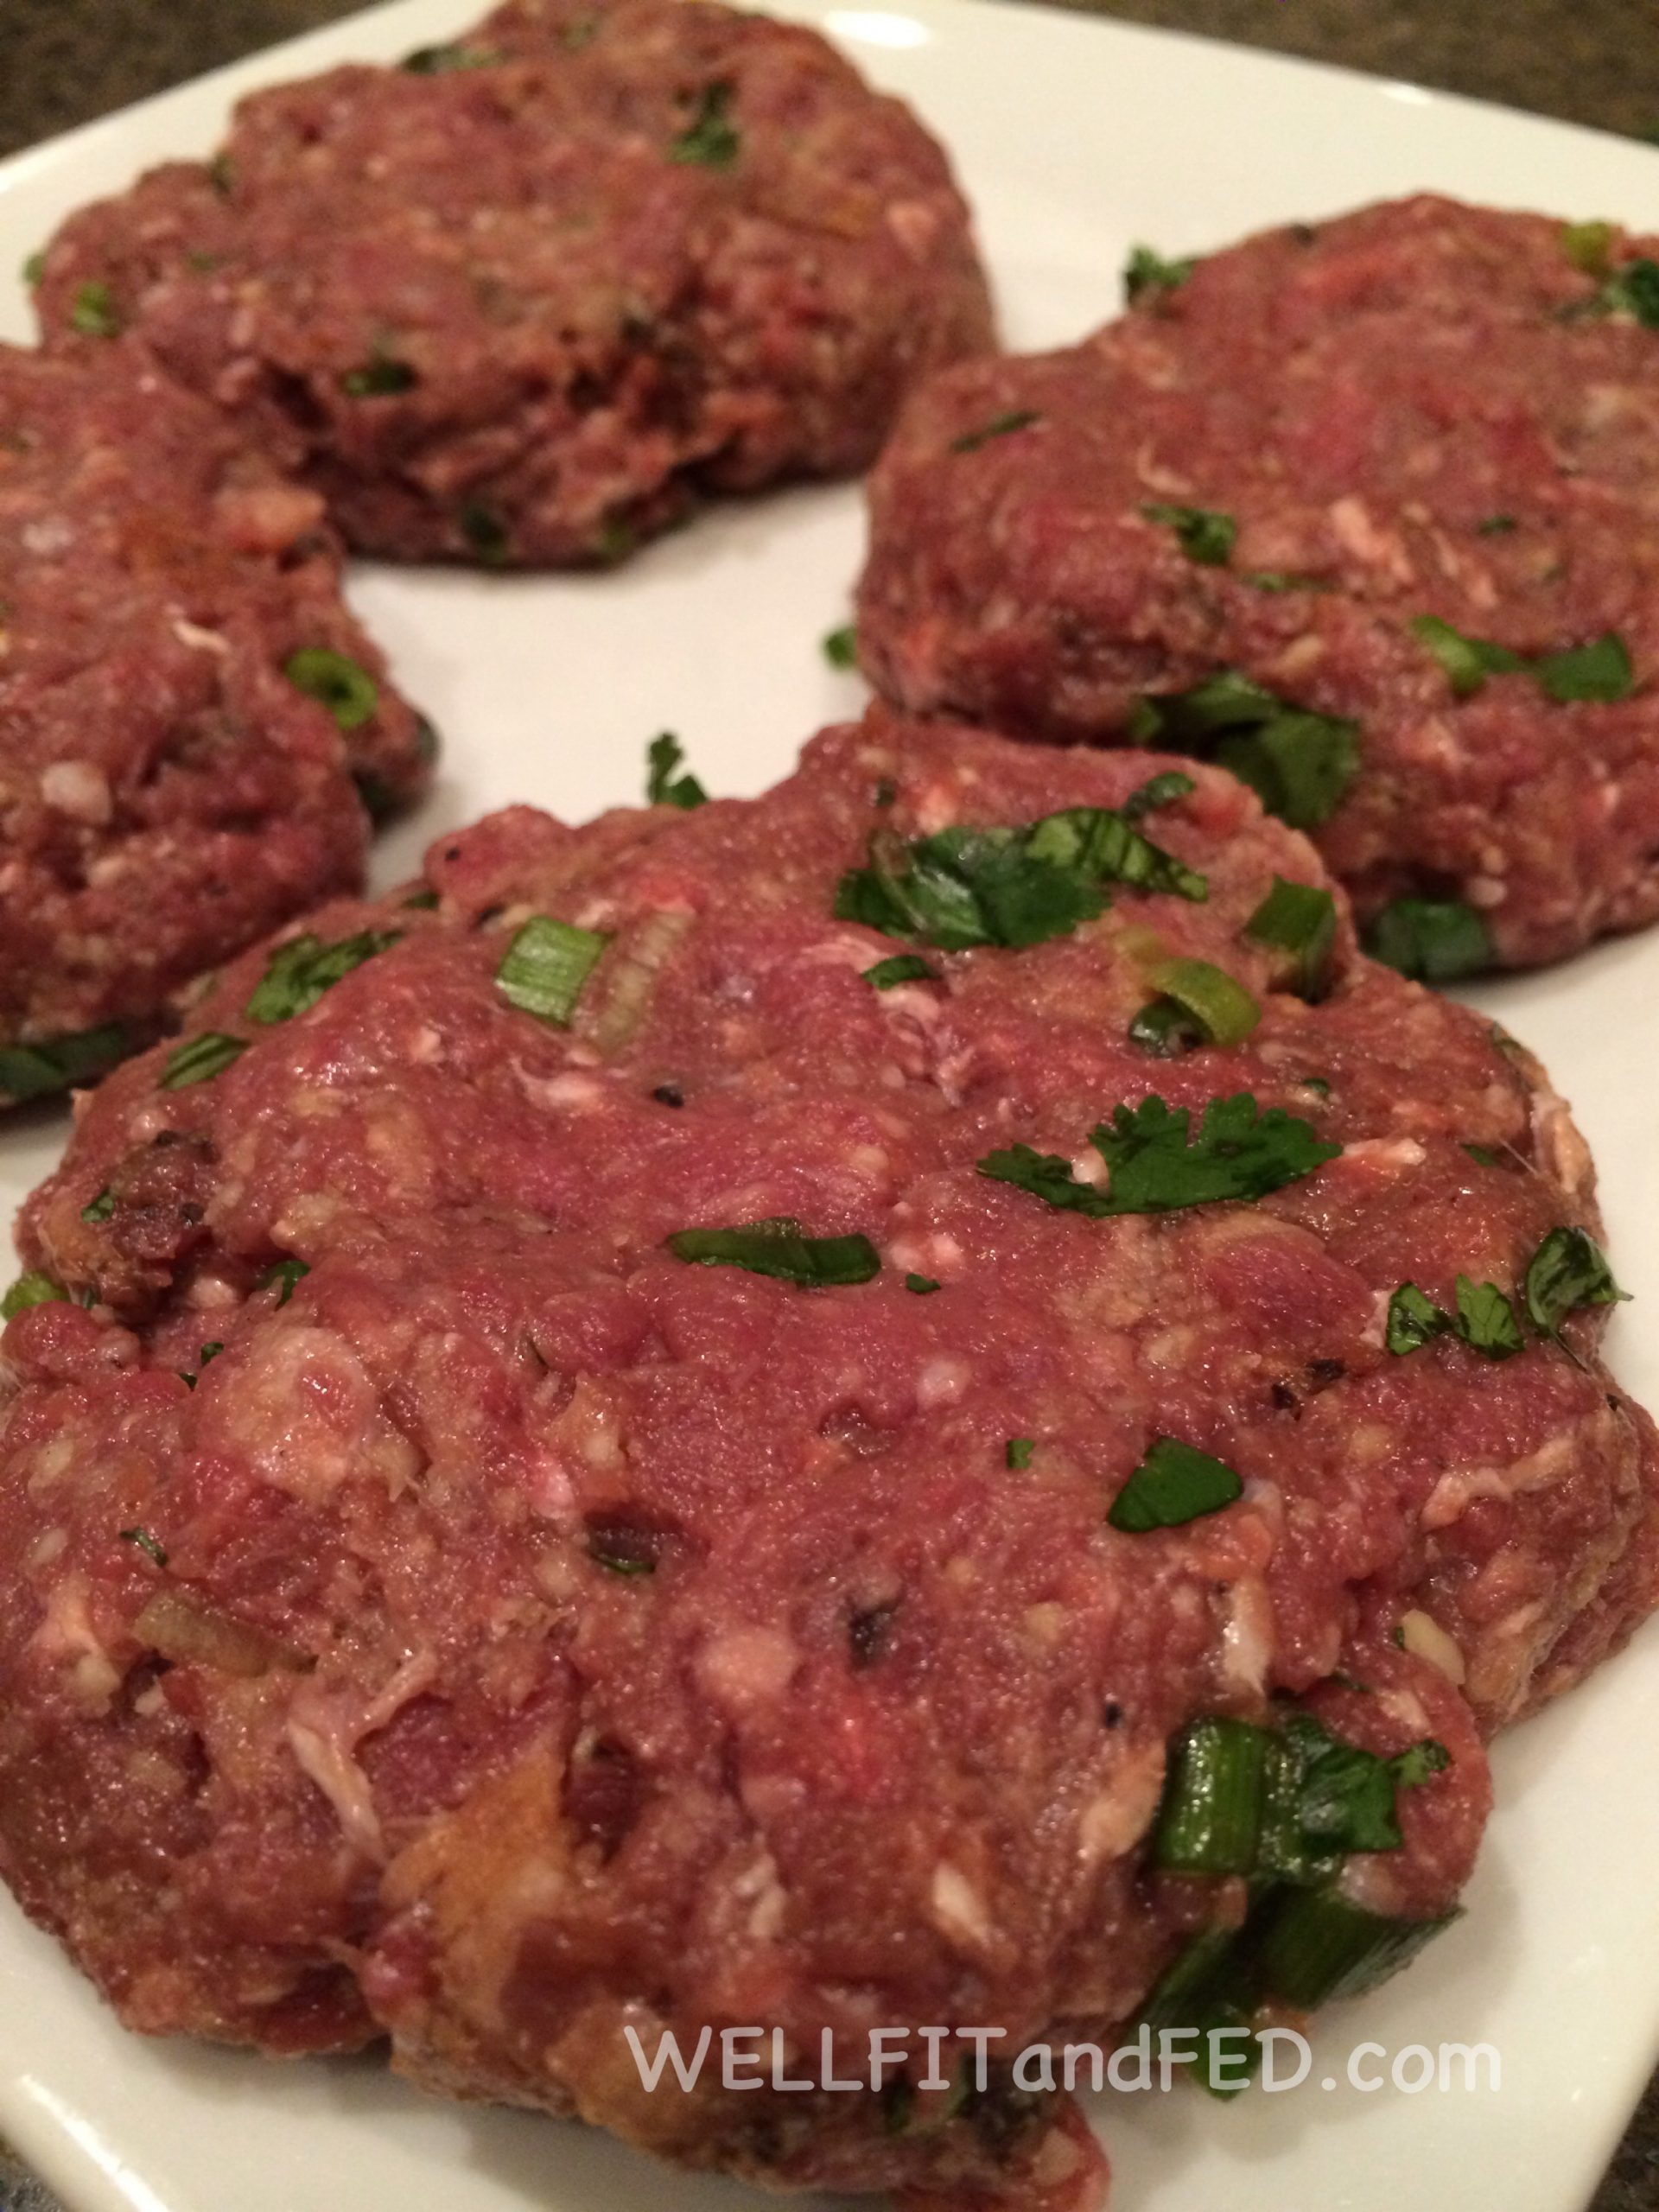 Paleo Bison Bacon Burgers: A Leaner, Healthier Way To Eat Burgers!WELLFITandFED